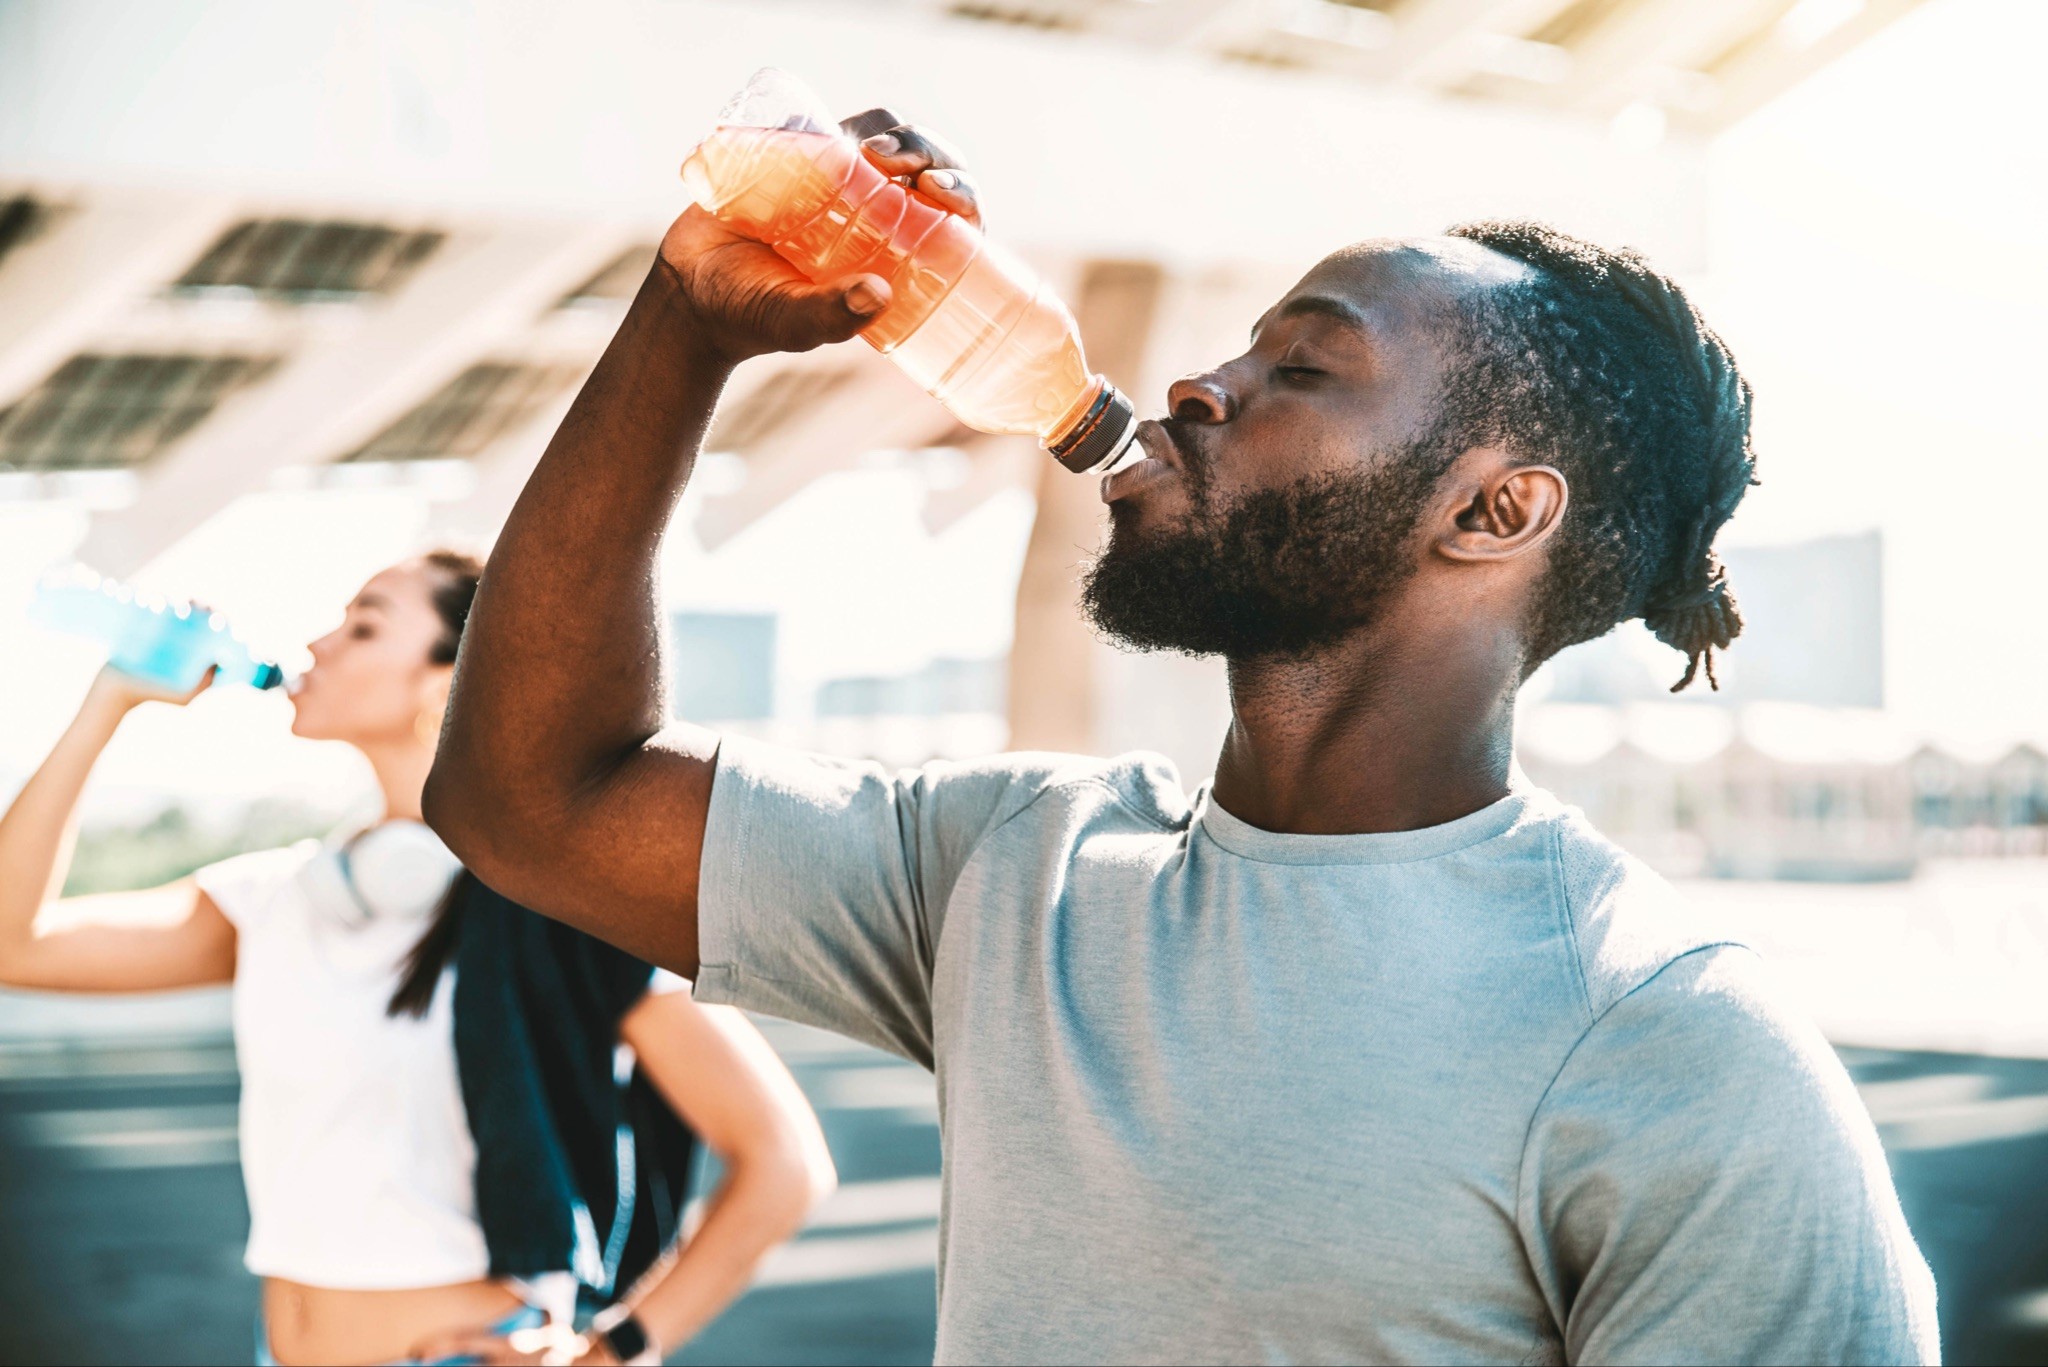 A man and a woman standing next to each other drinking a bottled sports drink after a workout.